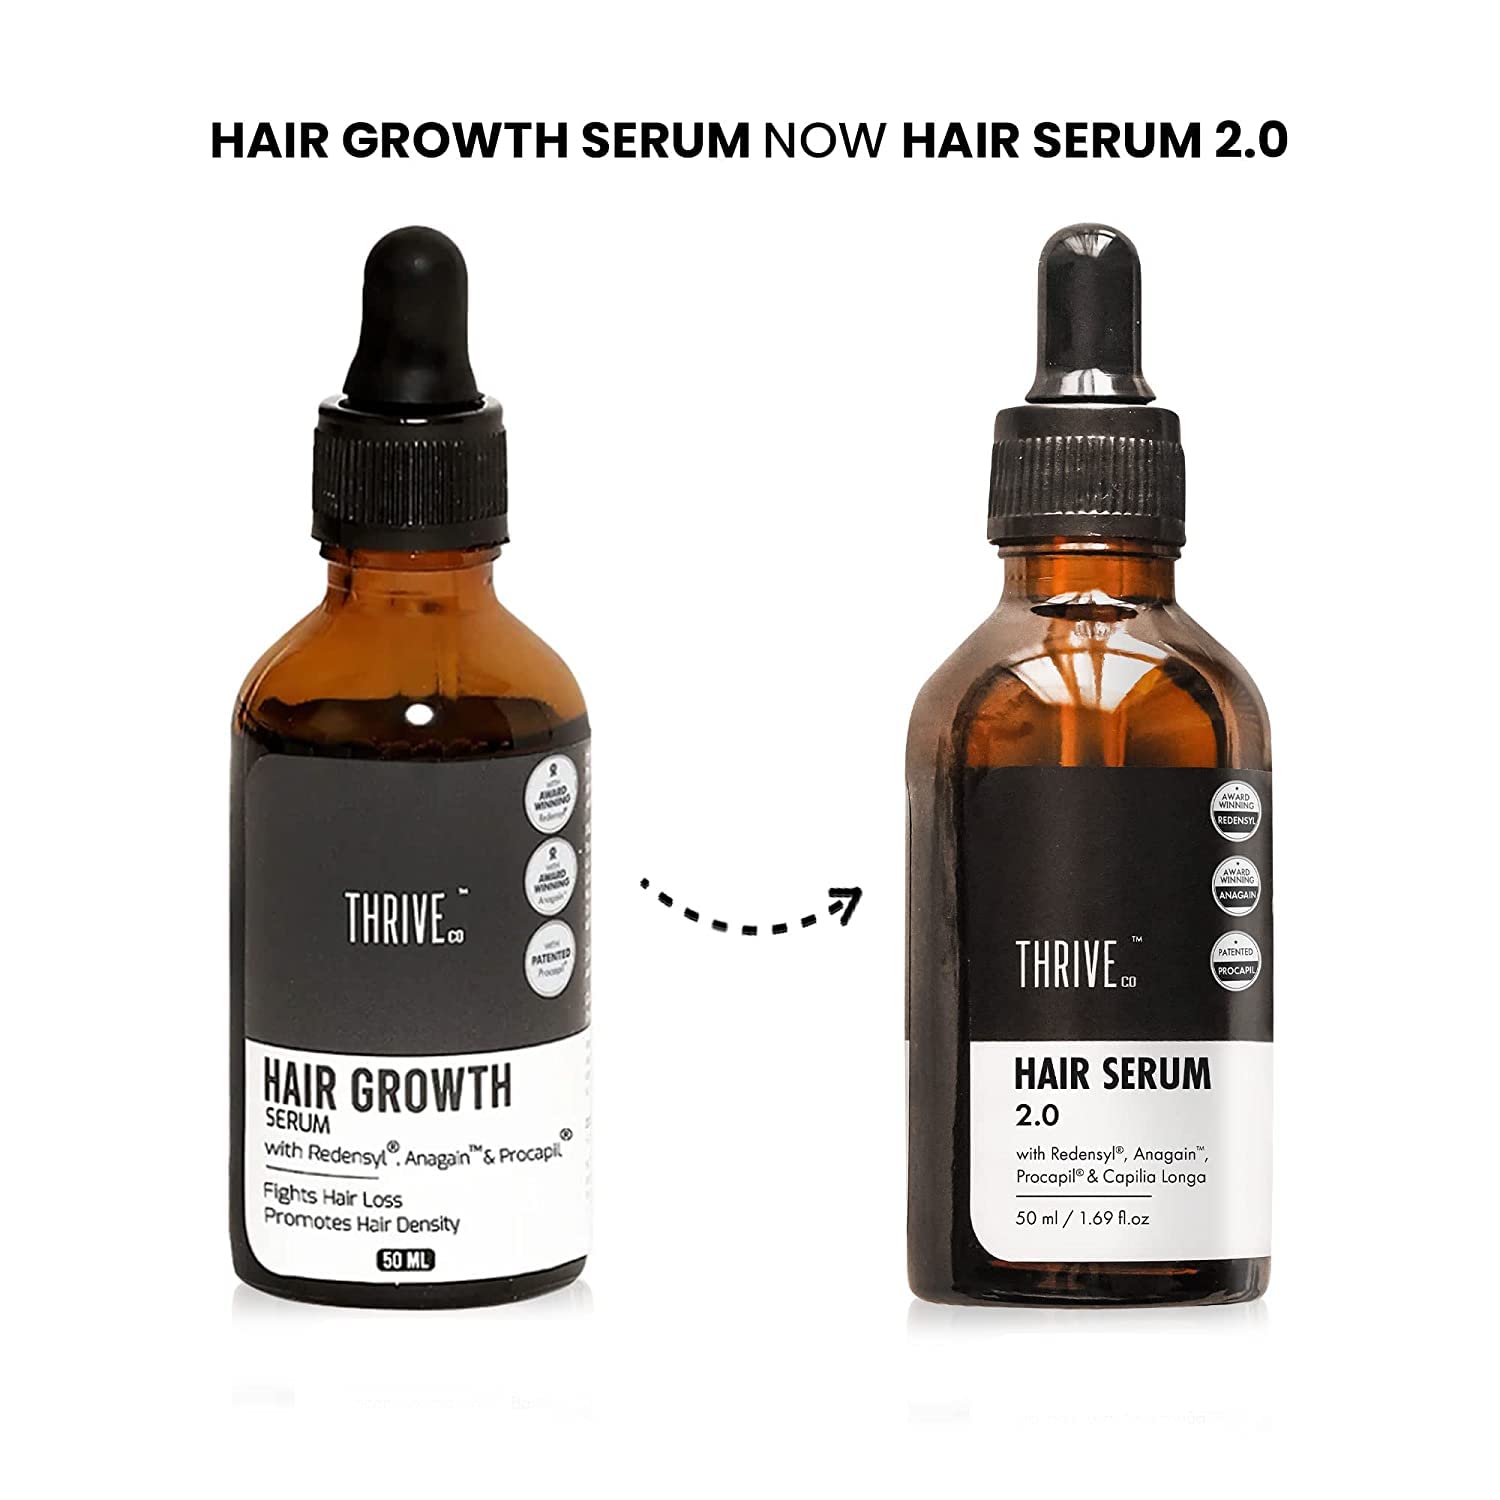 Nutranix Hair Growth Serum | with Redensyl, Anagain, Procapil & Capilia Longa for Hair Fall Control | for Men & Women | 50ml